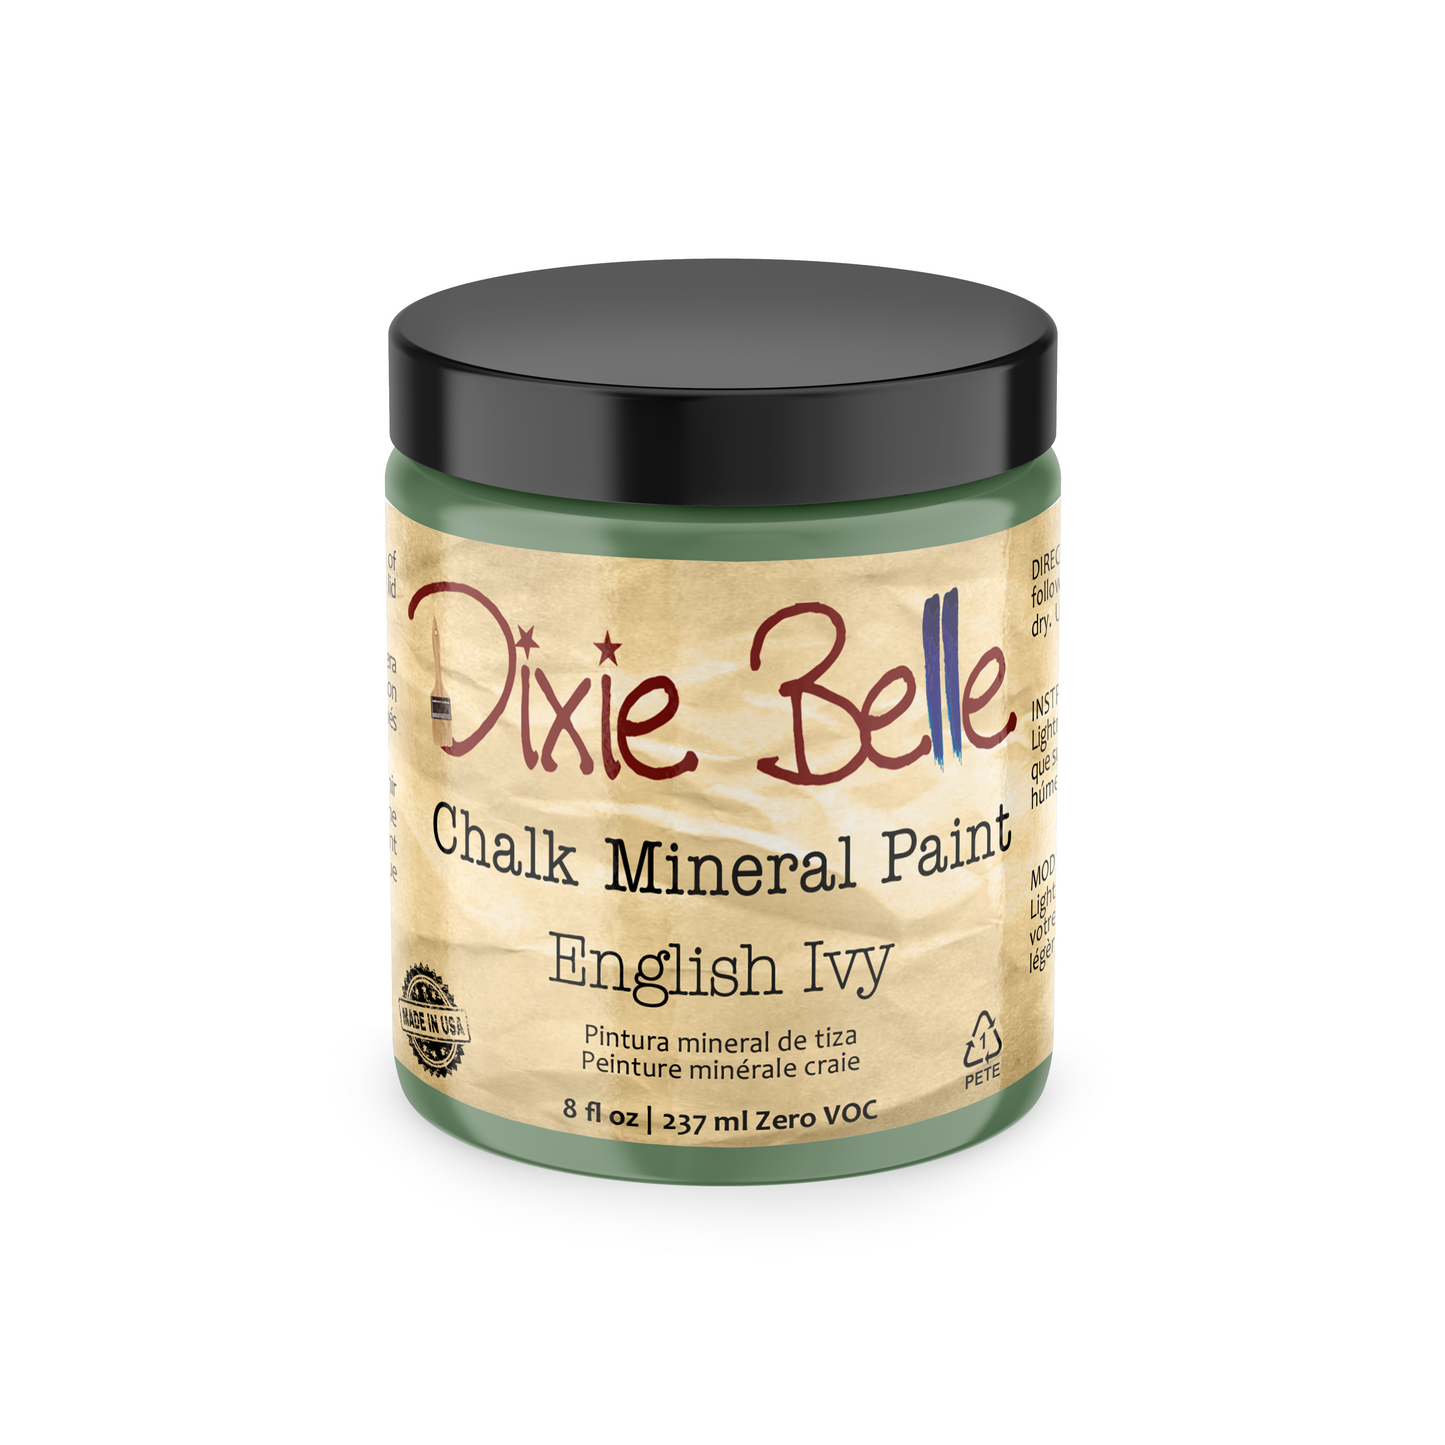 English Ivy - Dixie Belle Chalk Mineral Paint